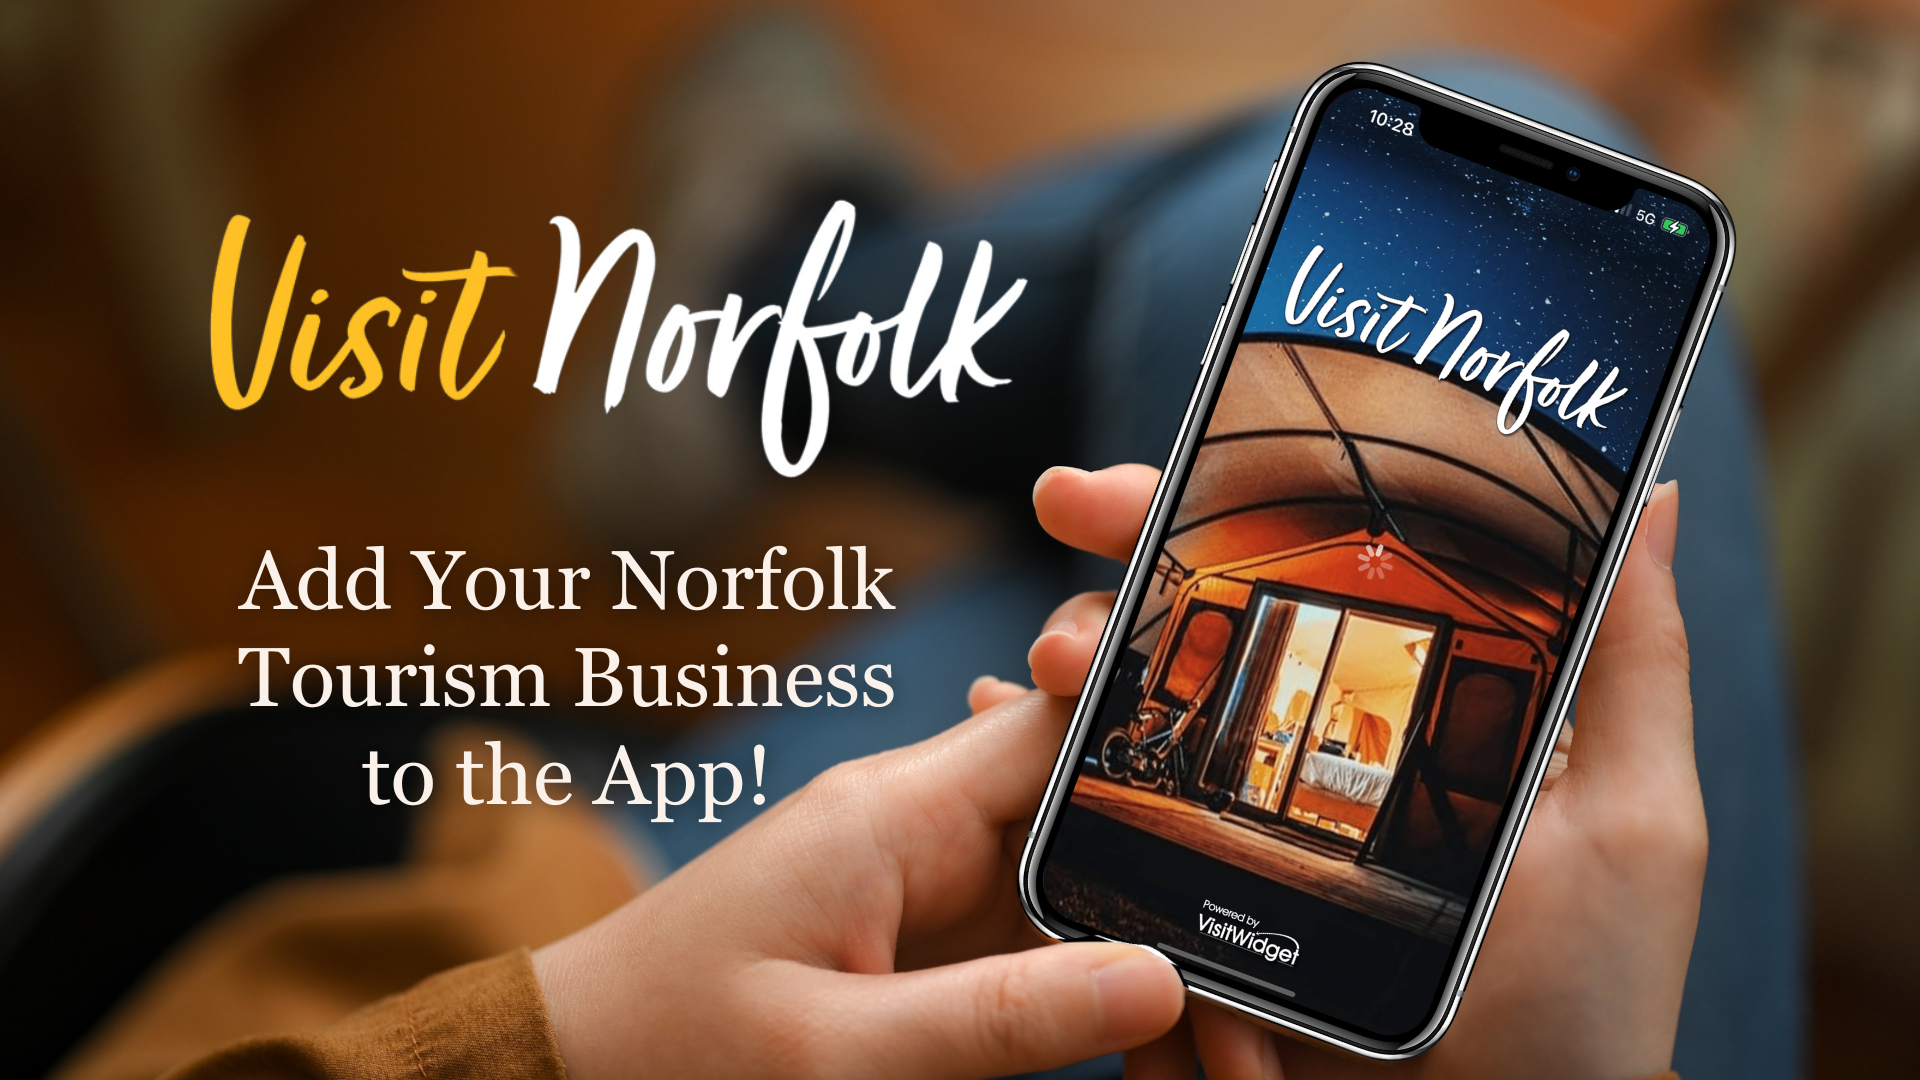 Add your tourism business to the Visit Norfolk app!